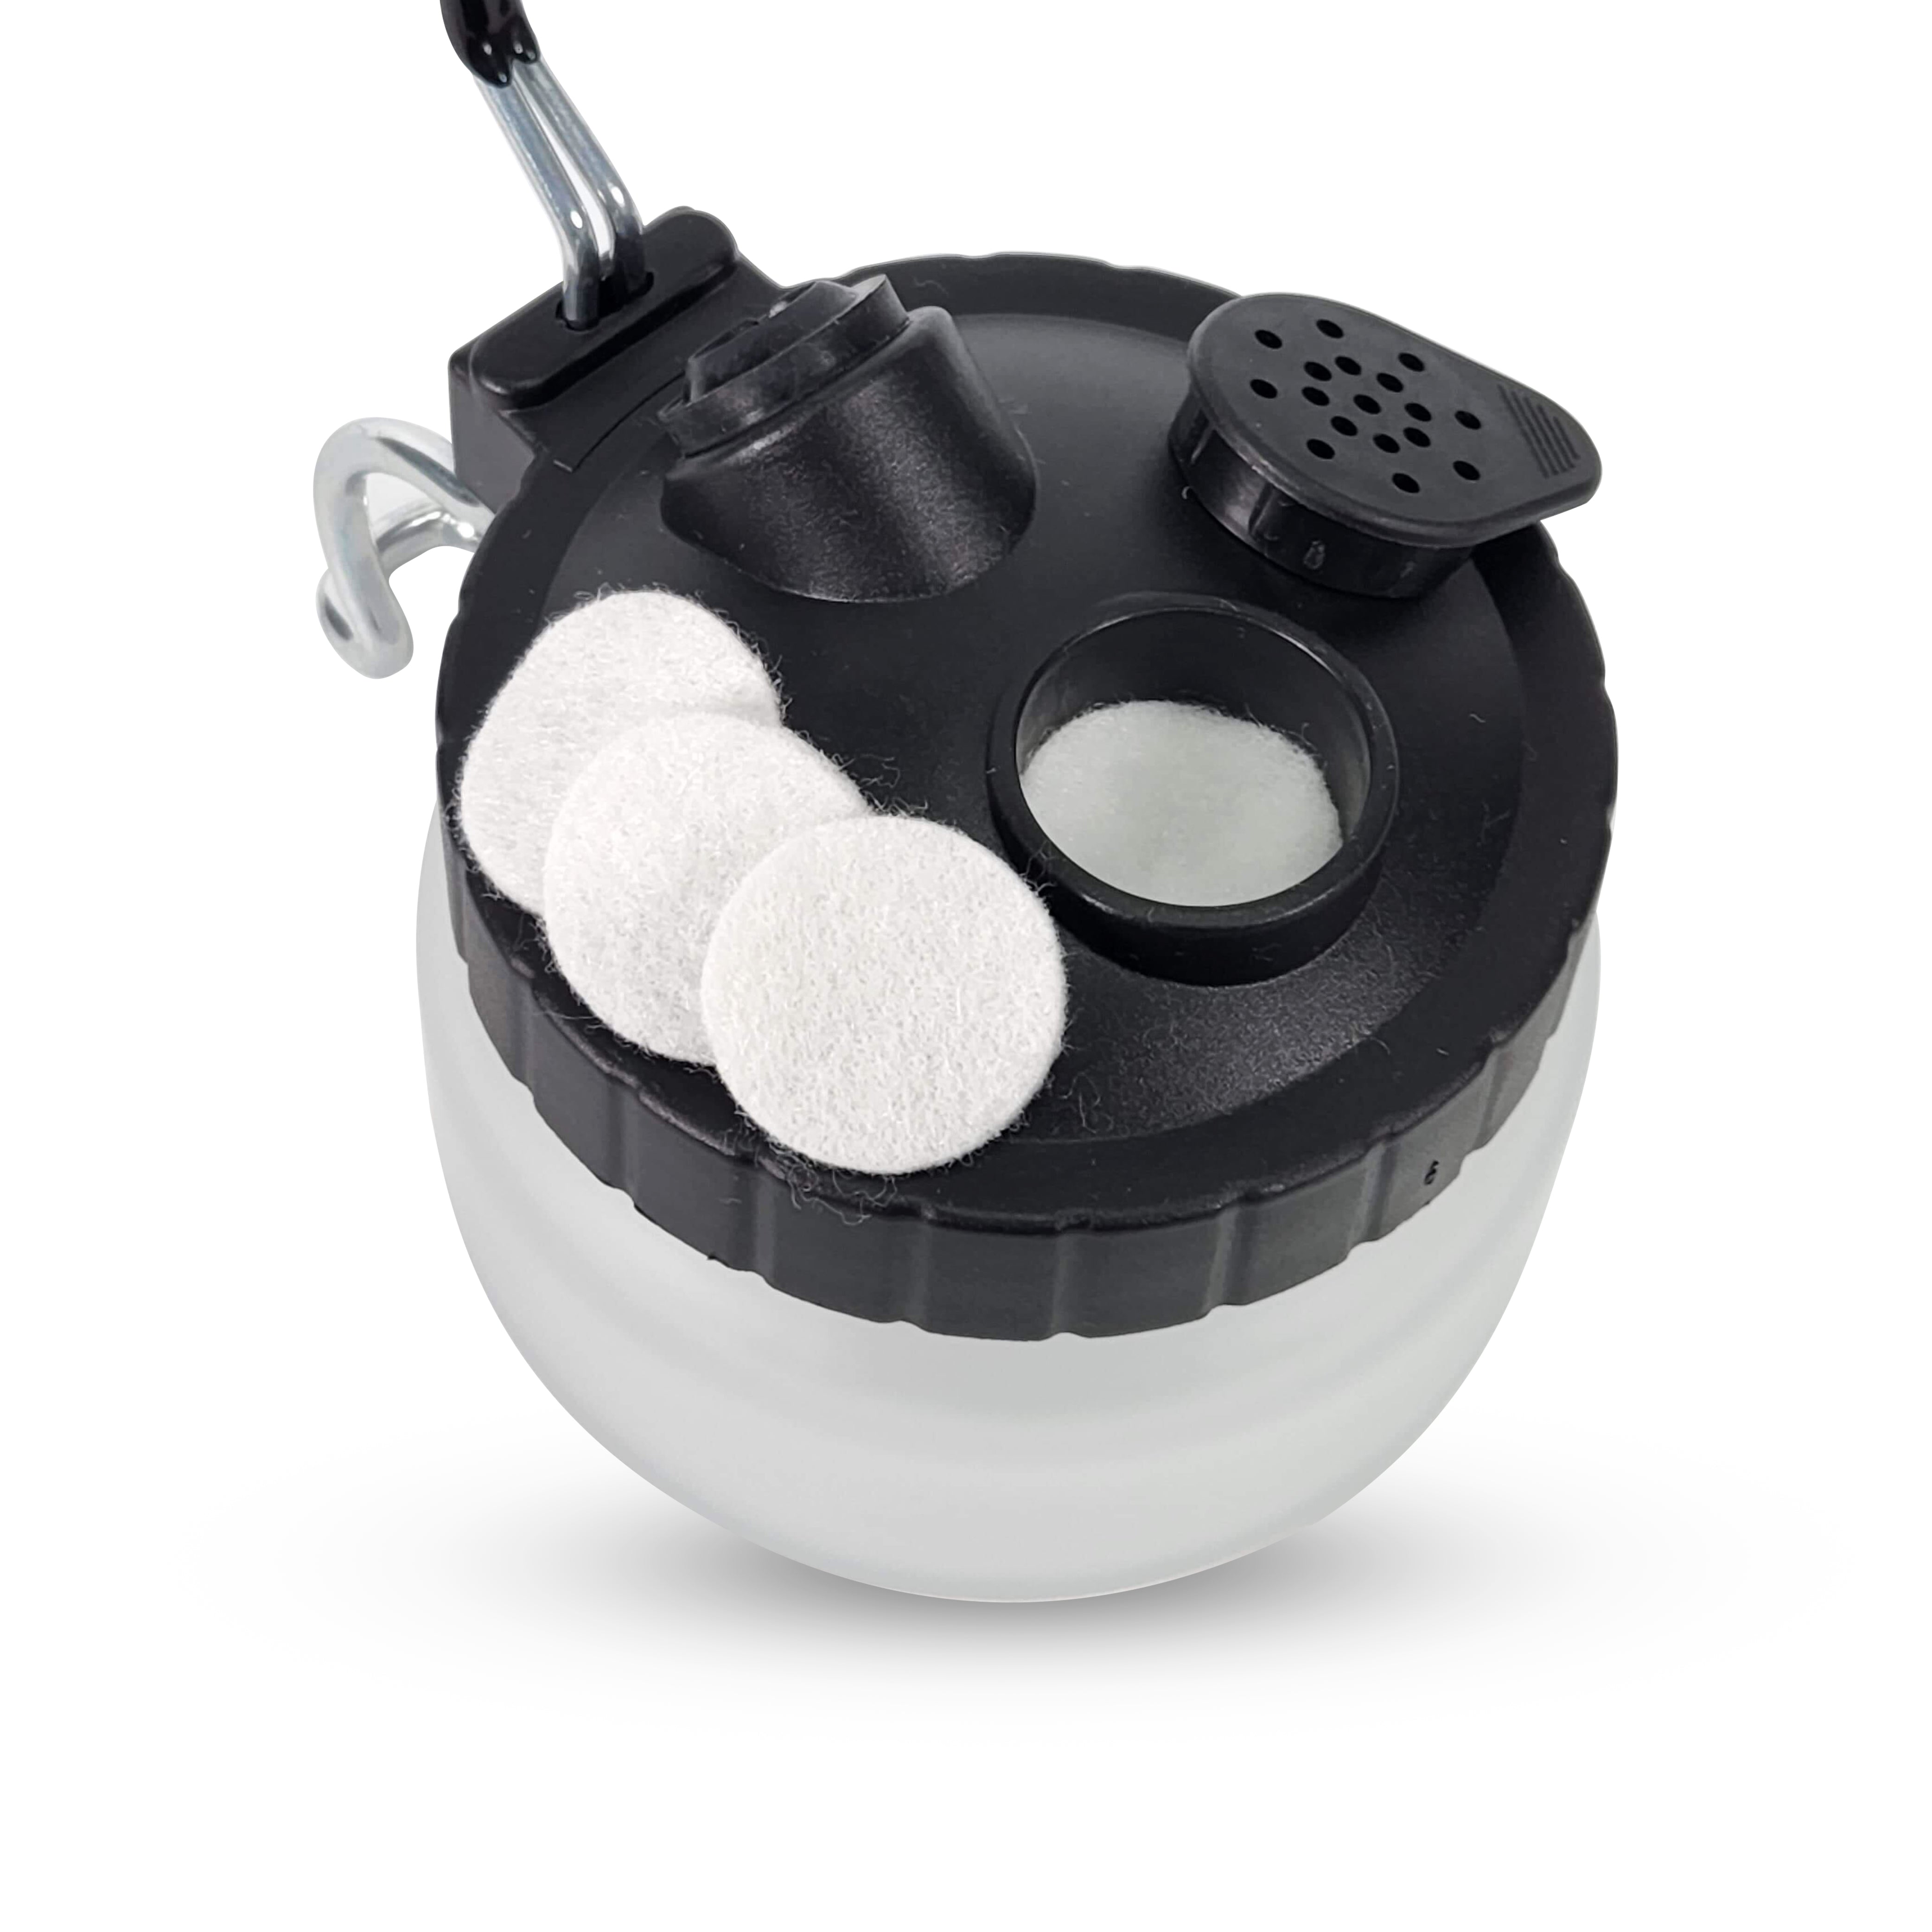 New Designed Portable And Convenient Rotoble Airbrush Pot On Every